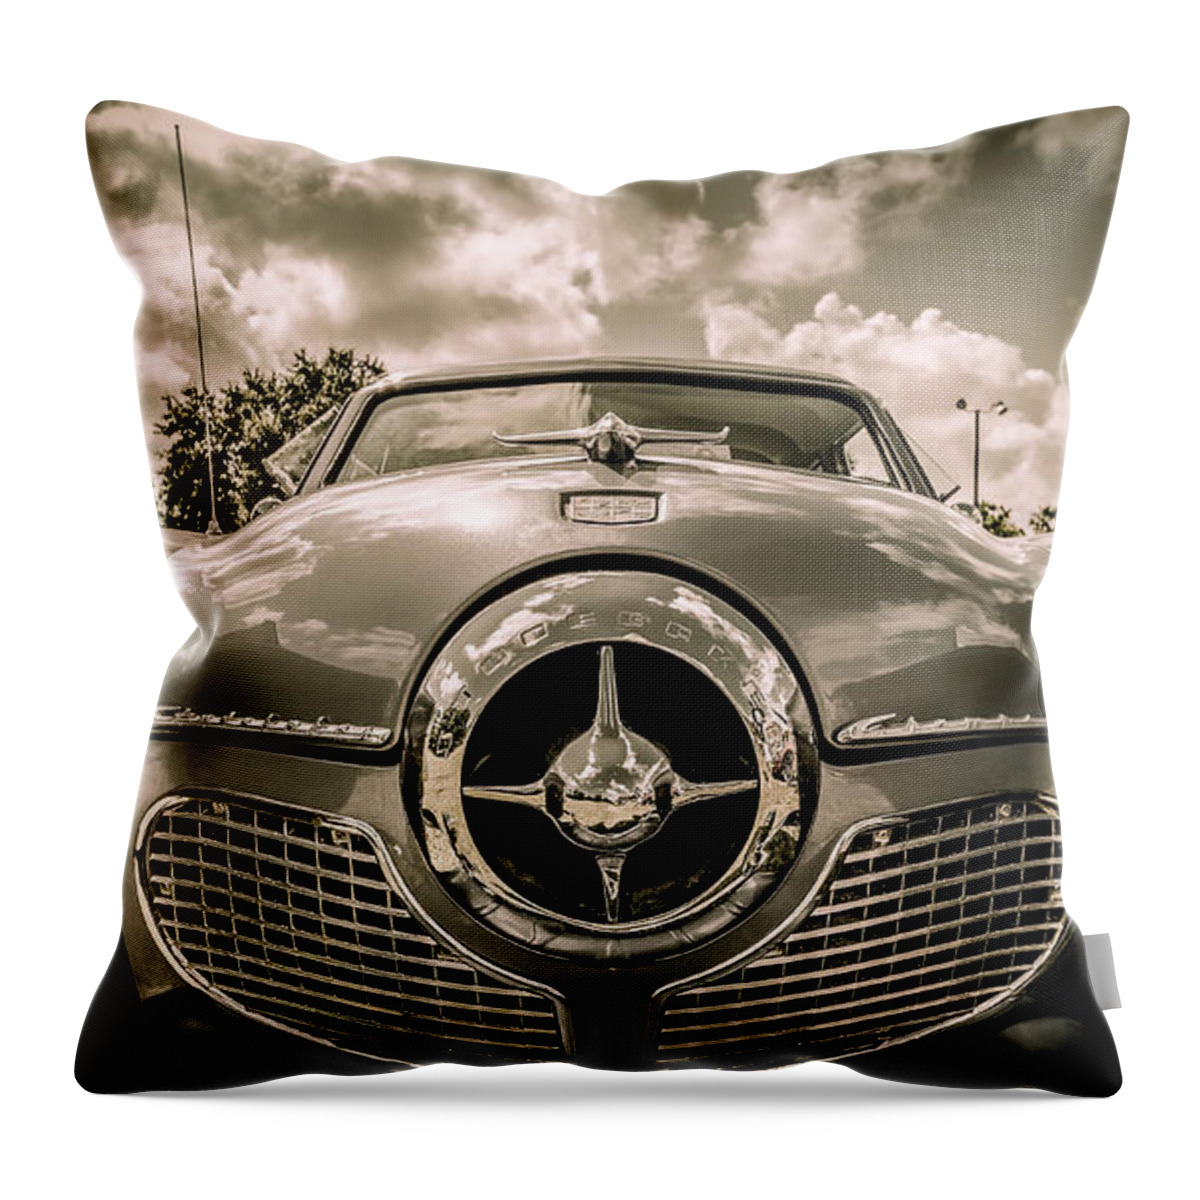 Studebaker Throw Pillow featuring the photograph Studebaker by David Morefield